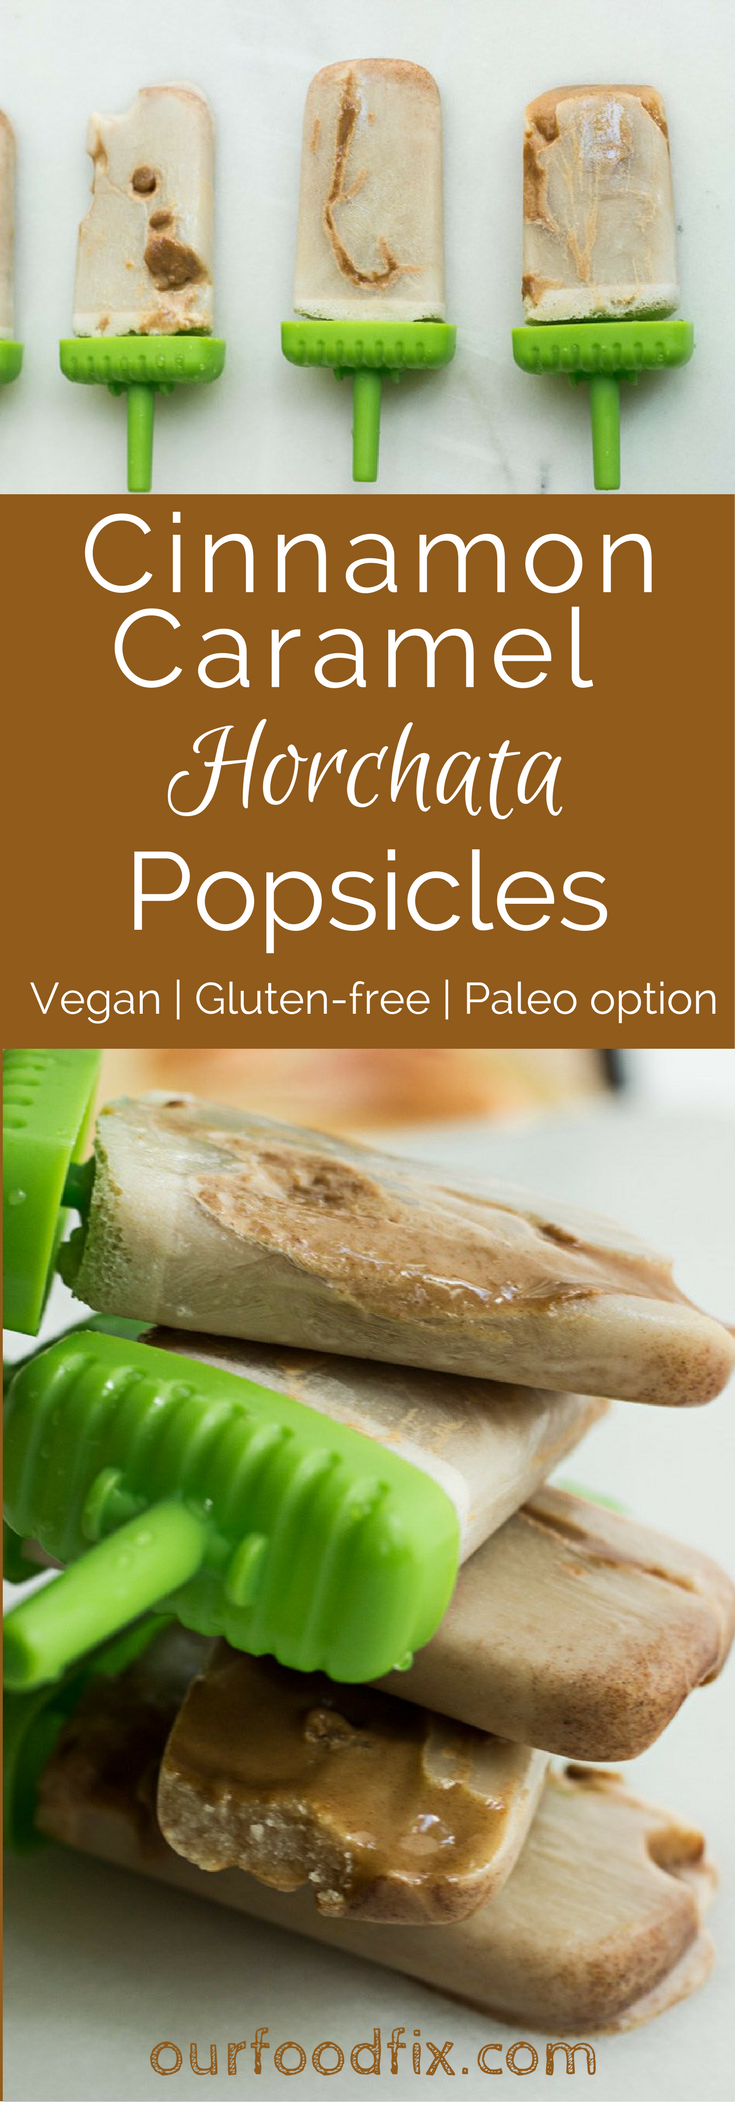 A cinnamon lovers delight, these healthy horchata popsicles are a refreshing summer treat. Vegan recipes | Gluten free recipes | Dairy free recipes | Paleo recipes | Low carb recipes | Ice pops | Summer recipes | Party food | Caramel